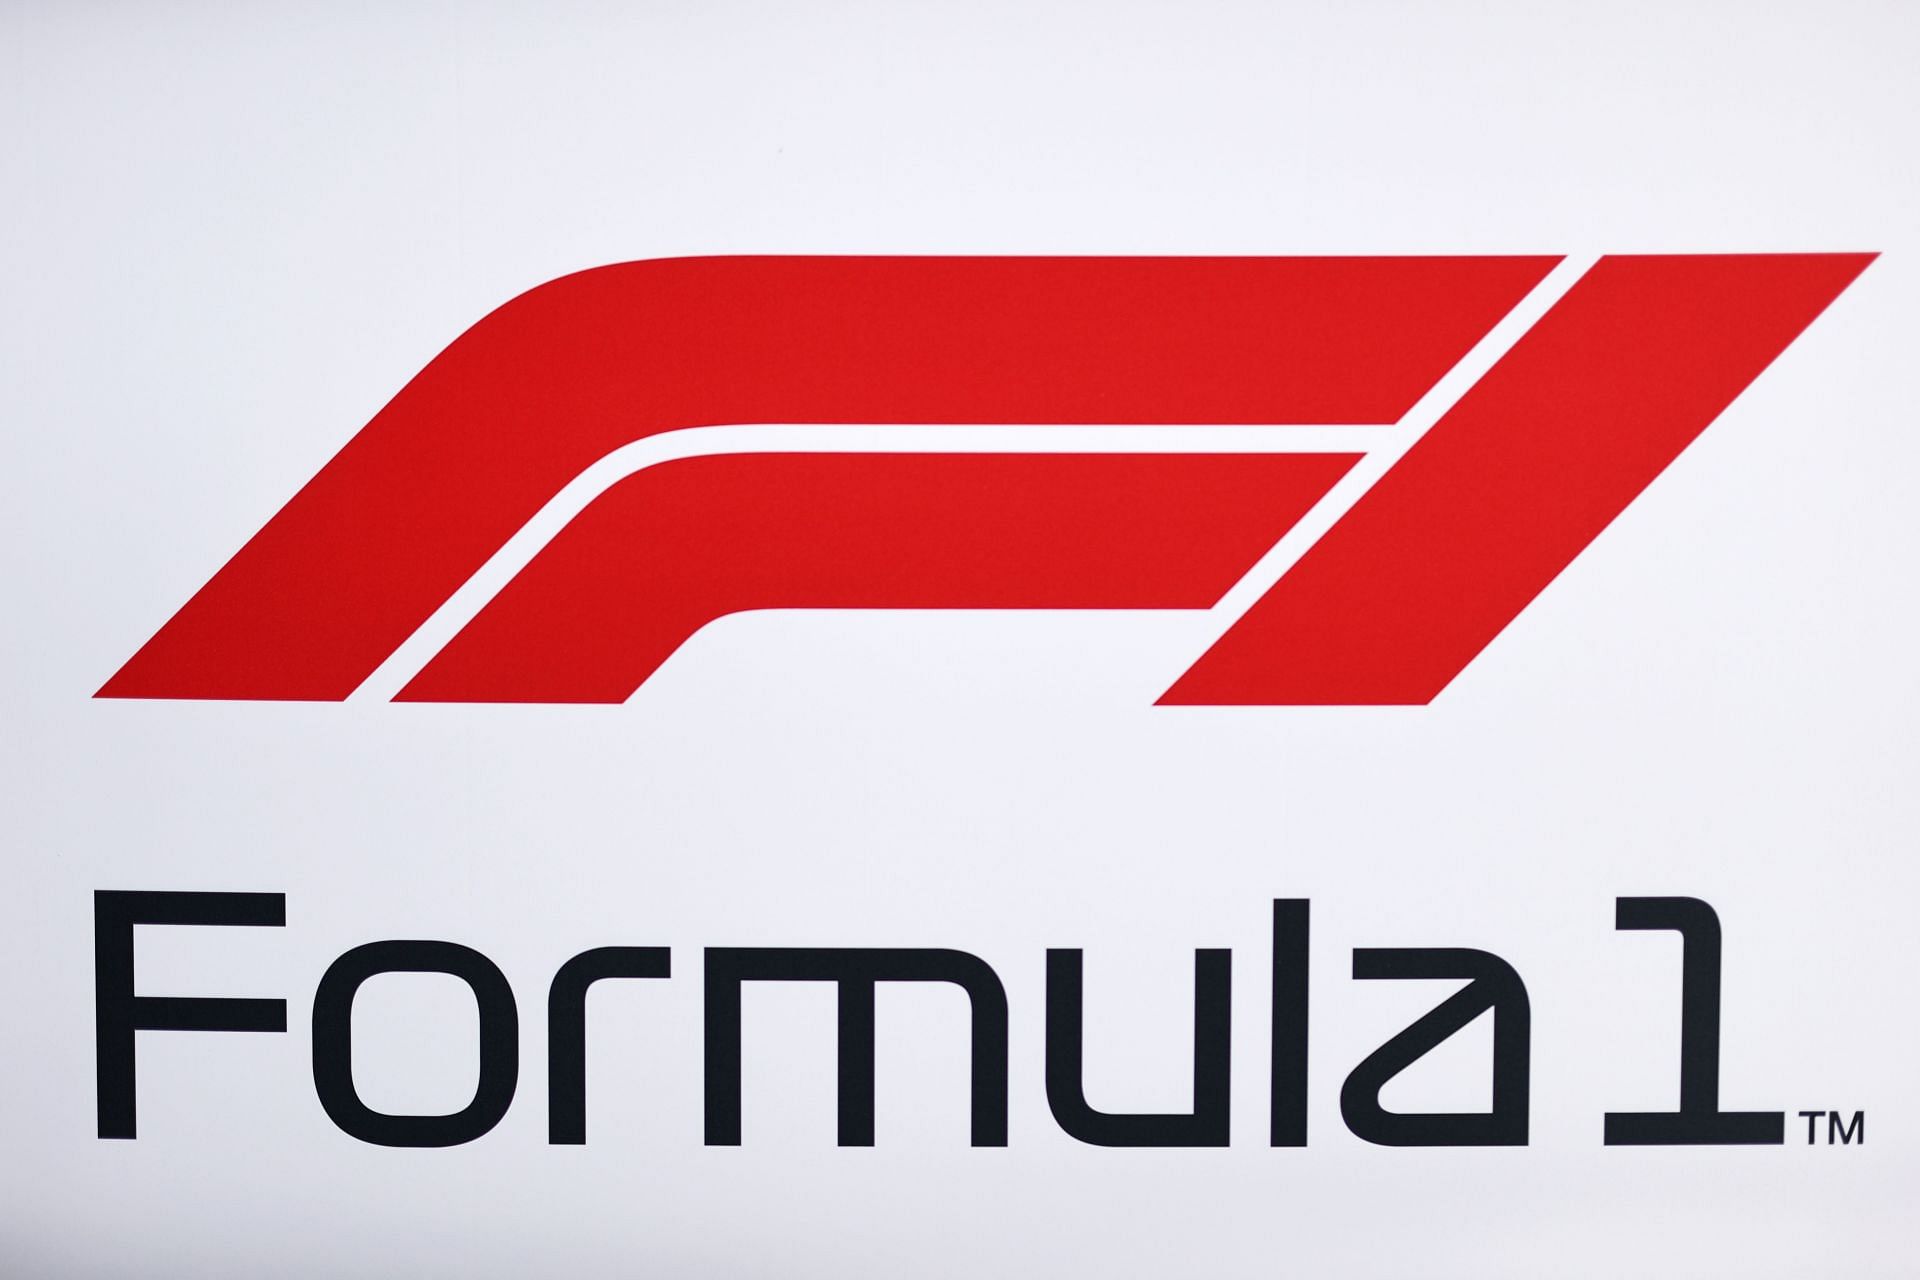 The Formula 1 logo in the Paddock in Austin, Texas. (Photo by Chris Graythen/Getty Images)